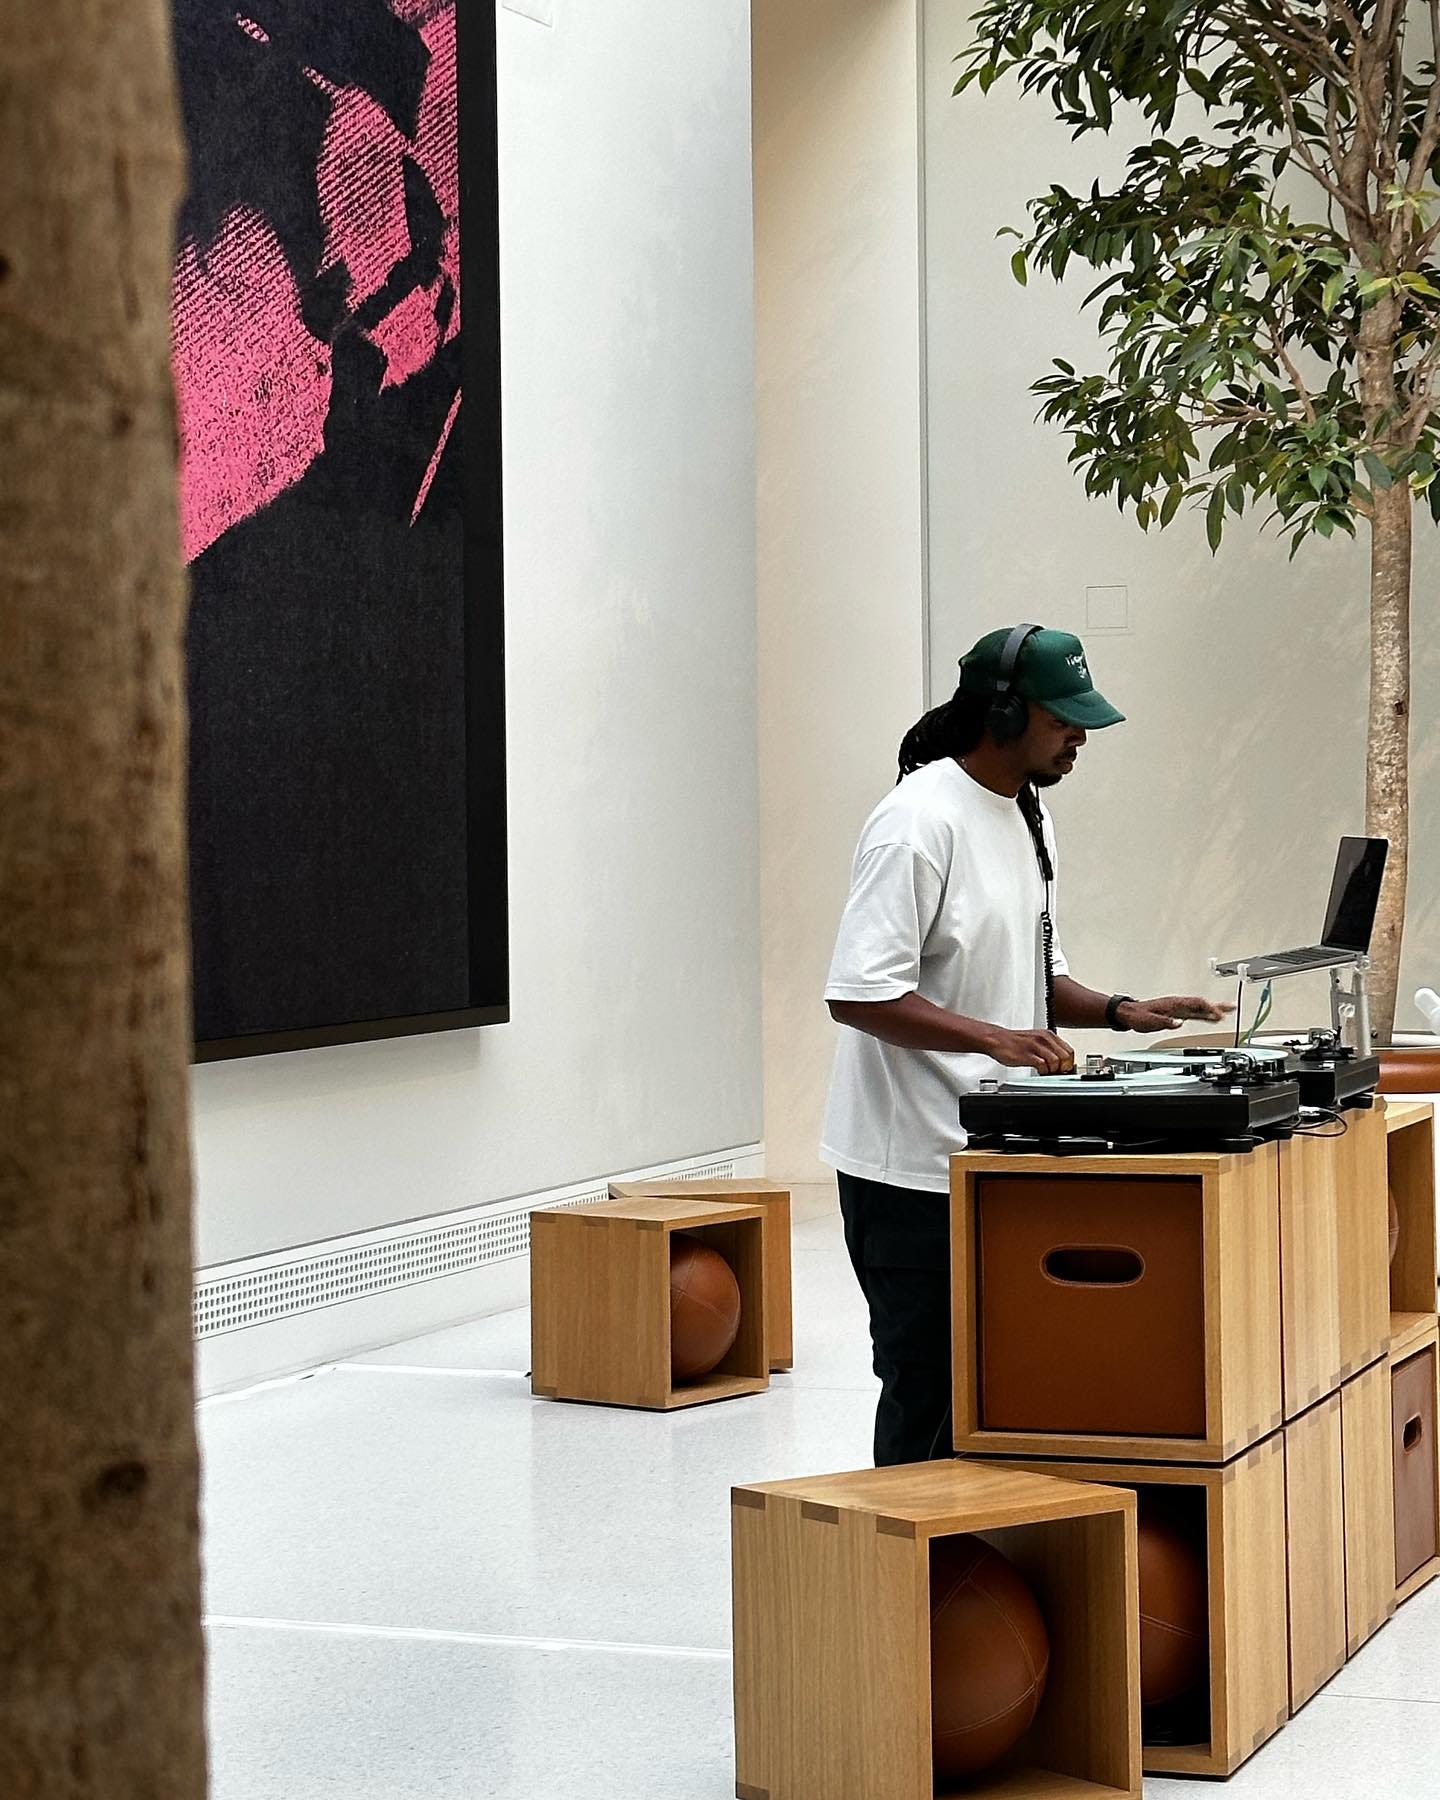 A DJ performs in the Forum at Apple Carnegie Library. Forum cubes are stacked to make a table, and DJ equipment sits on top. In the foreground and background, there are trees.